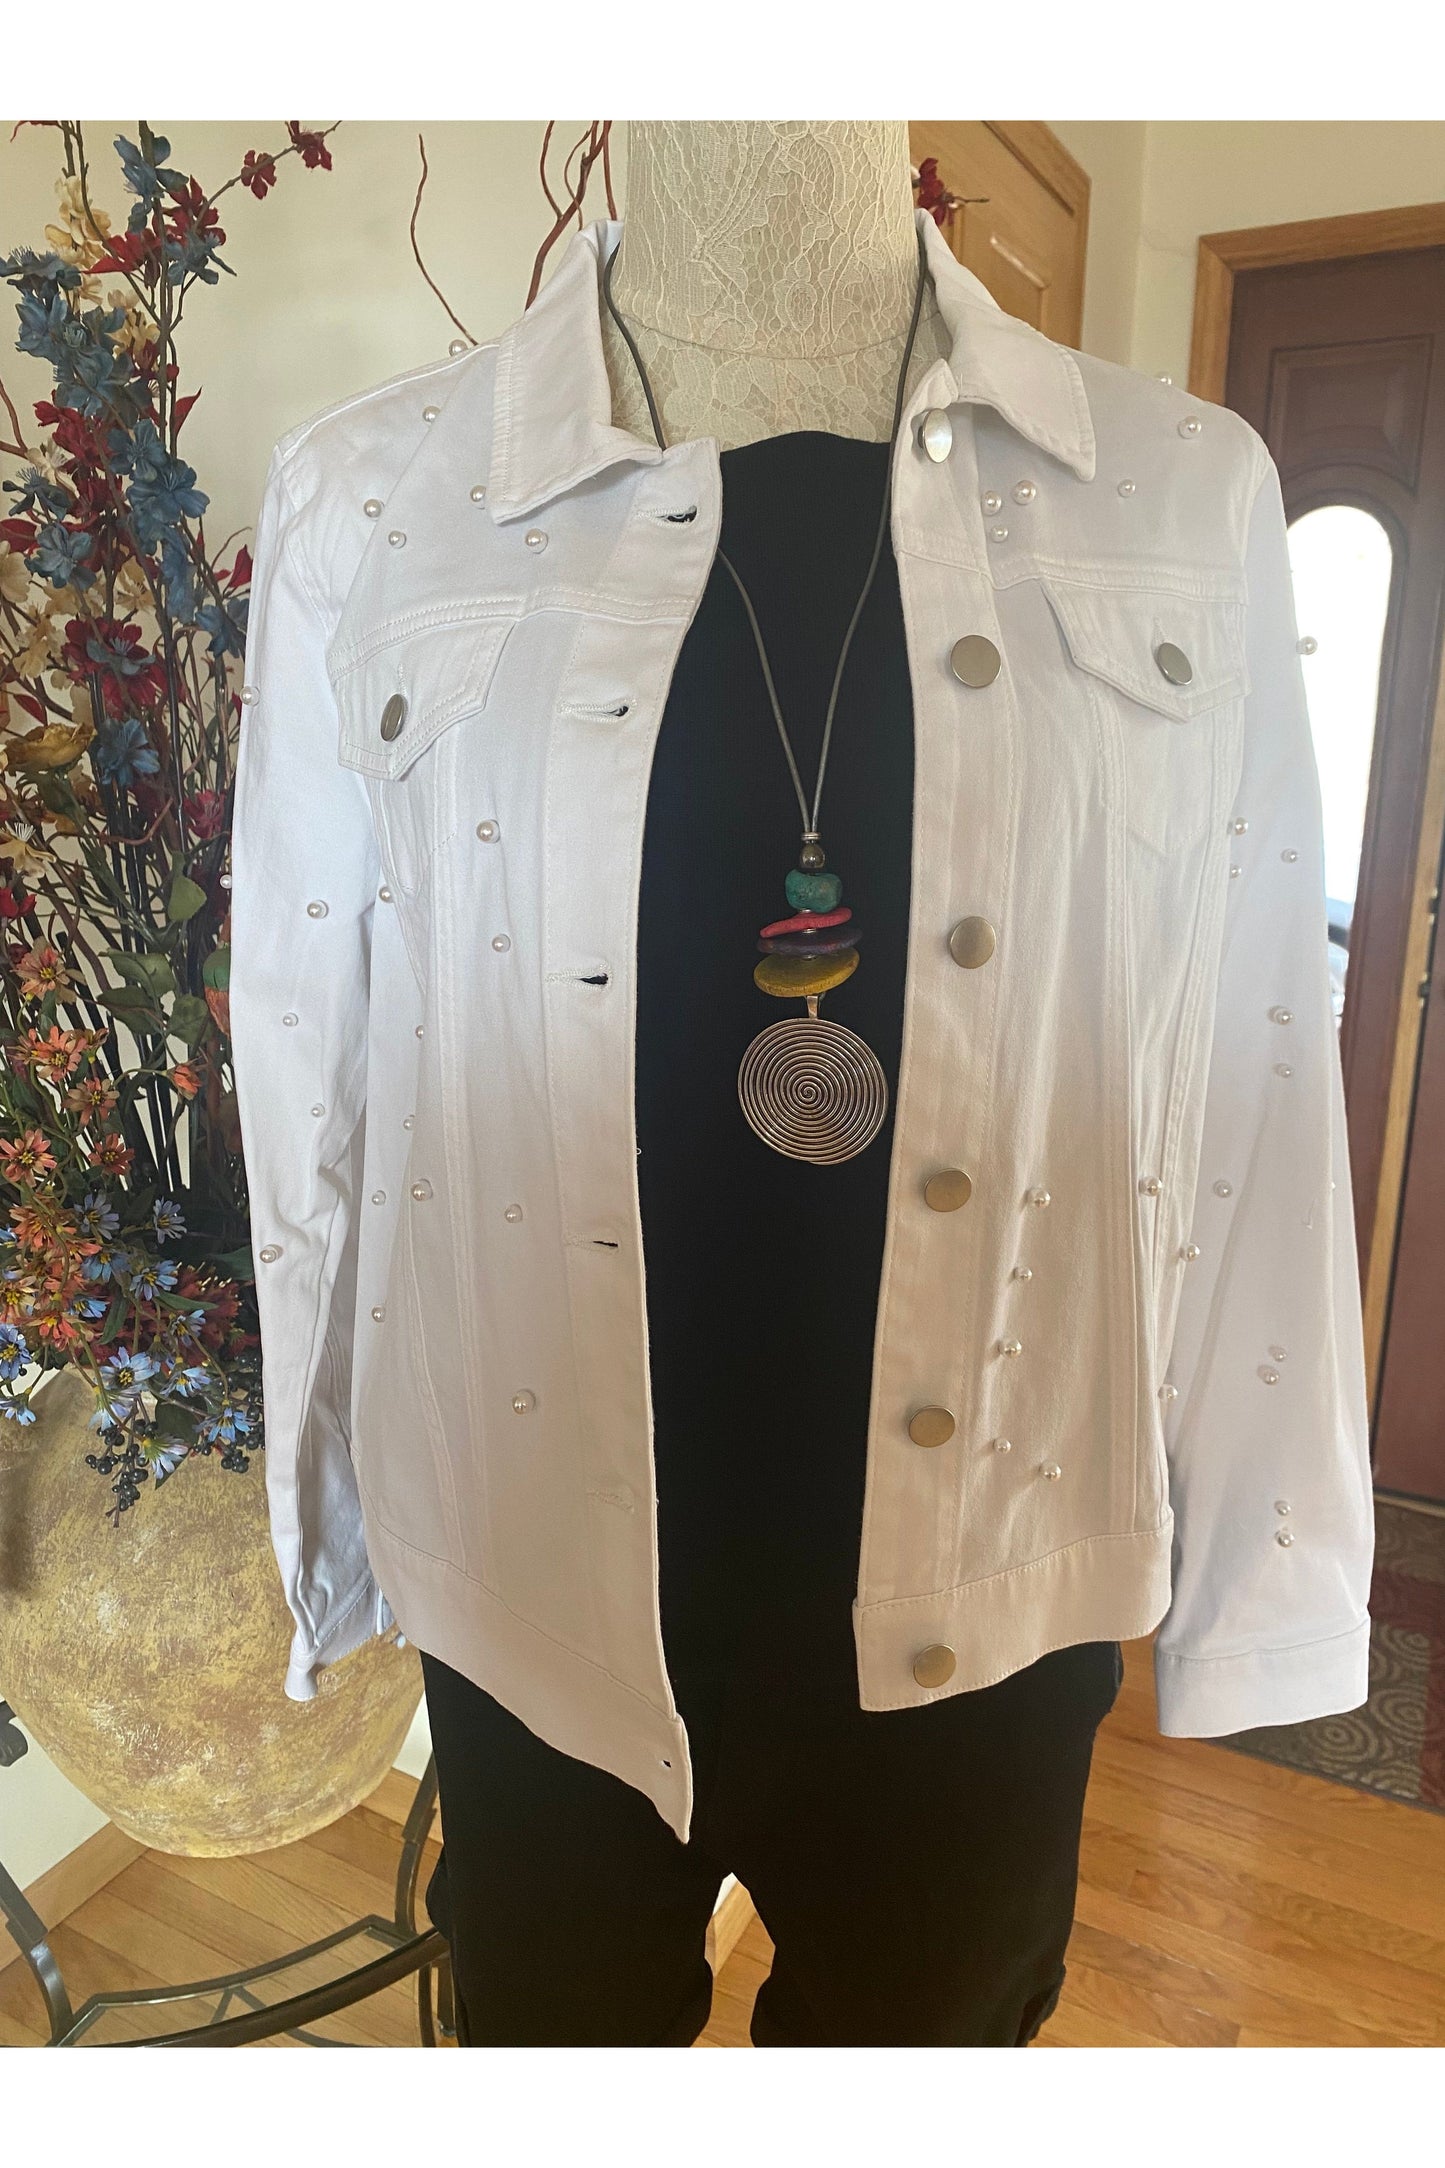 Multiples - Cuffed Long Sleeve 2 Pocket Button Jean Jacket with Pearl Embellishment - White - M13608JM